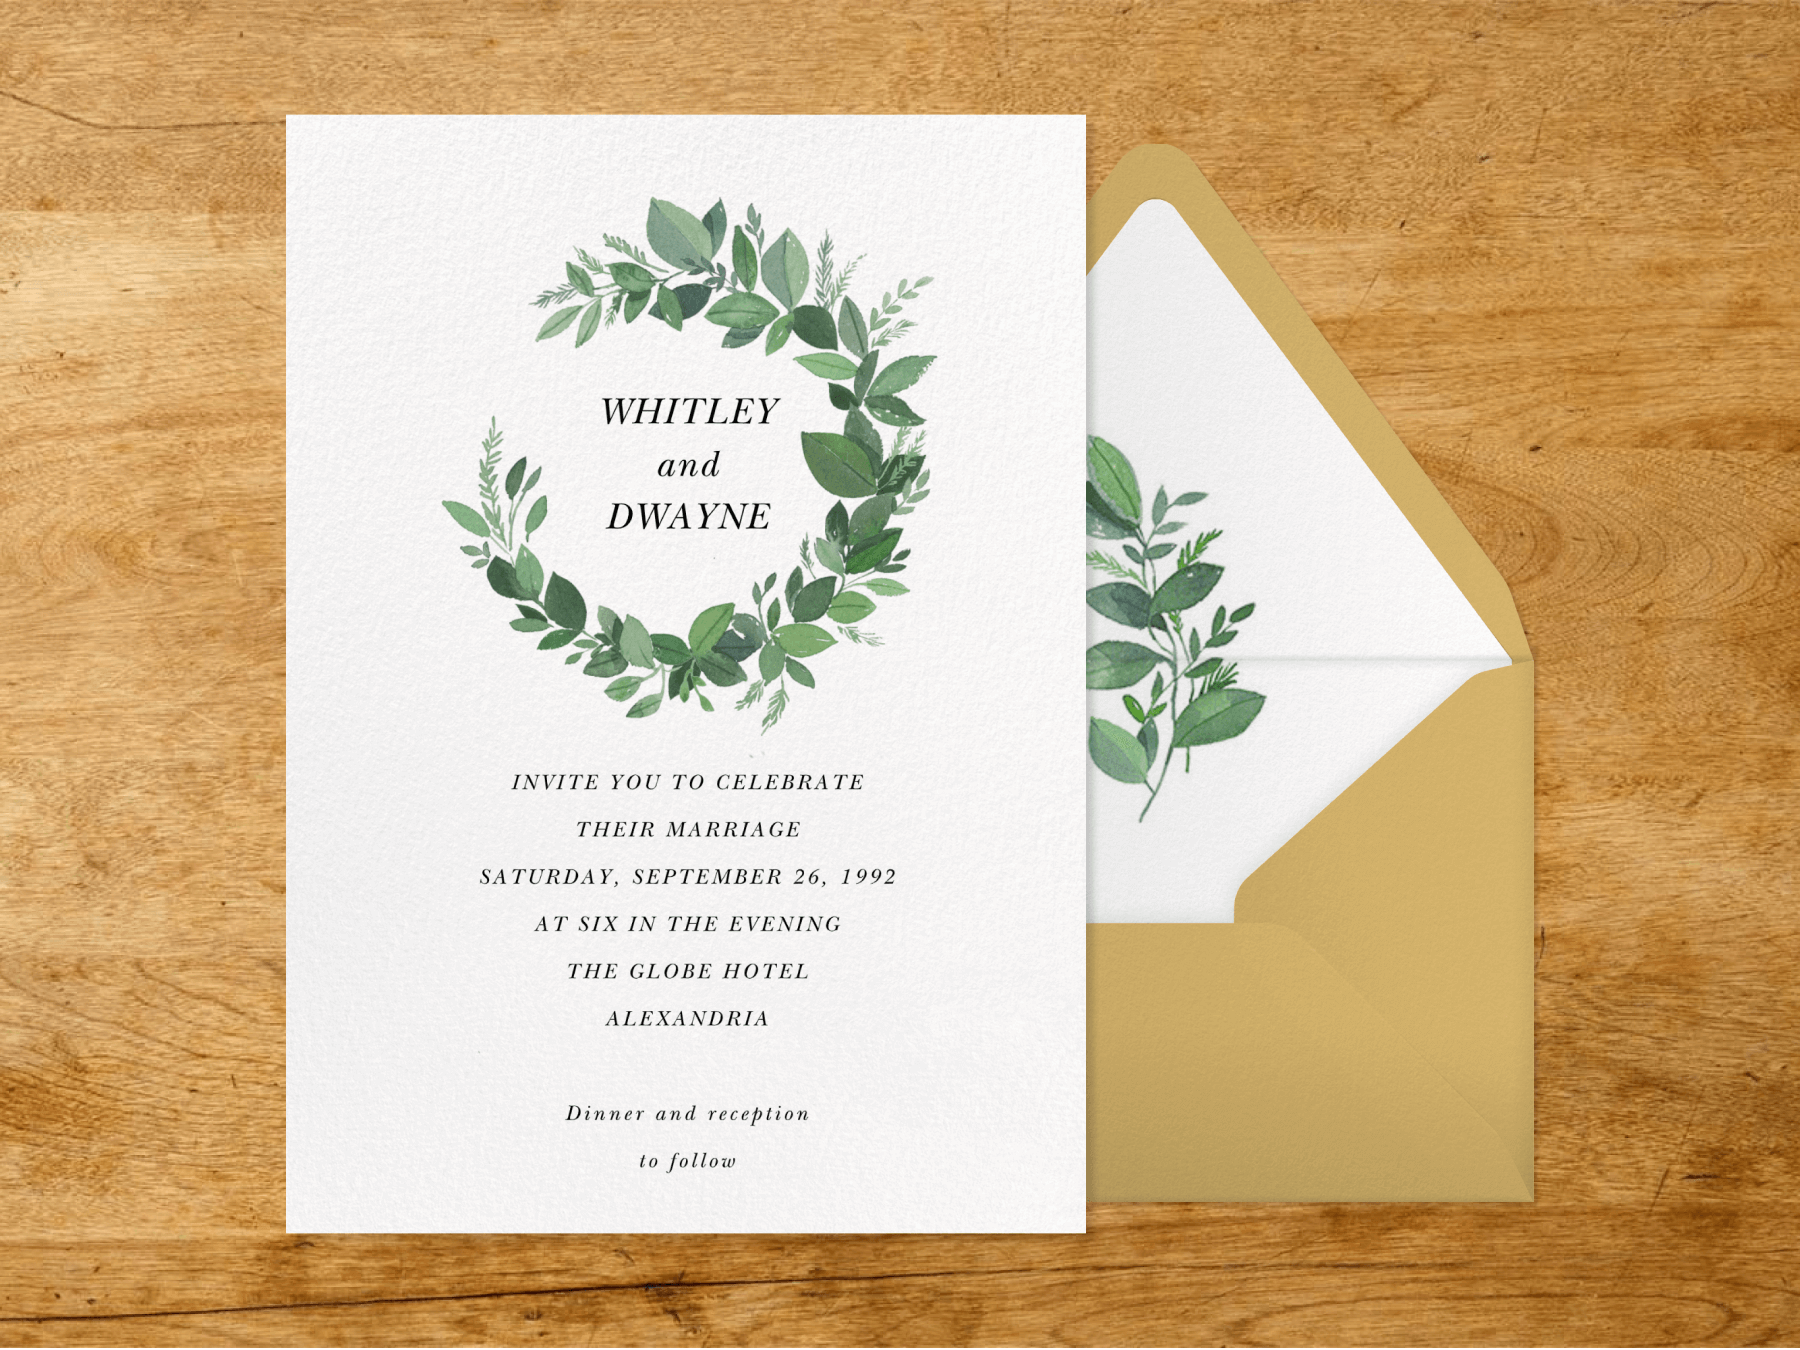 A wedding invitation with a green leaf wreath around the names.